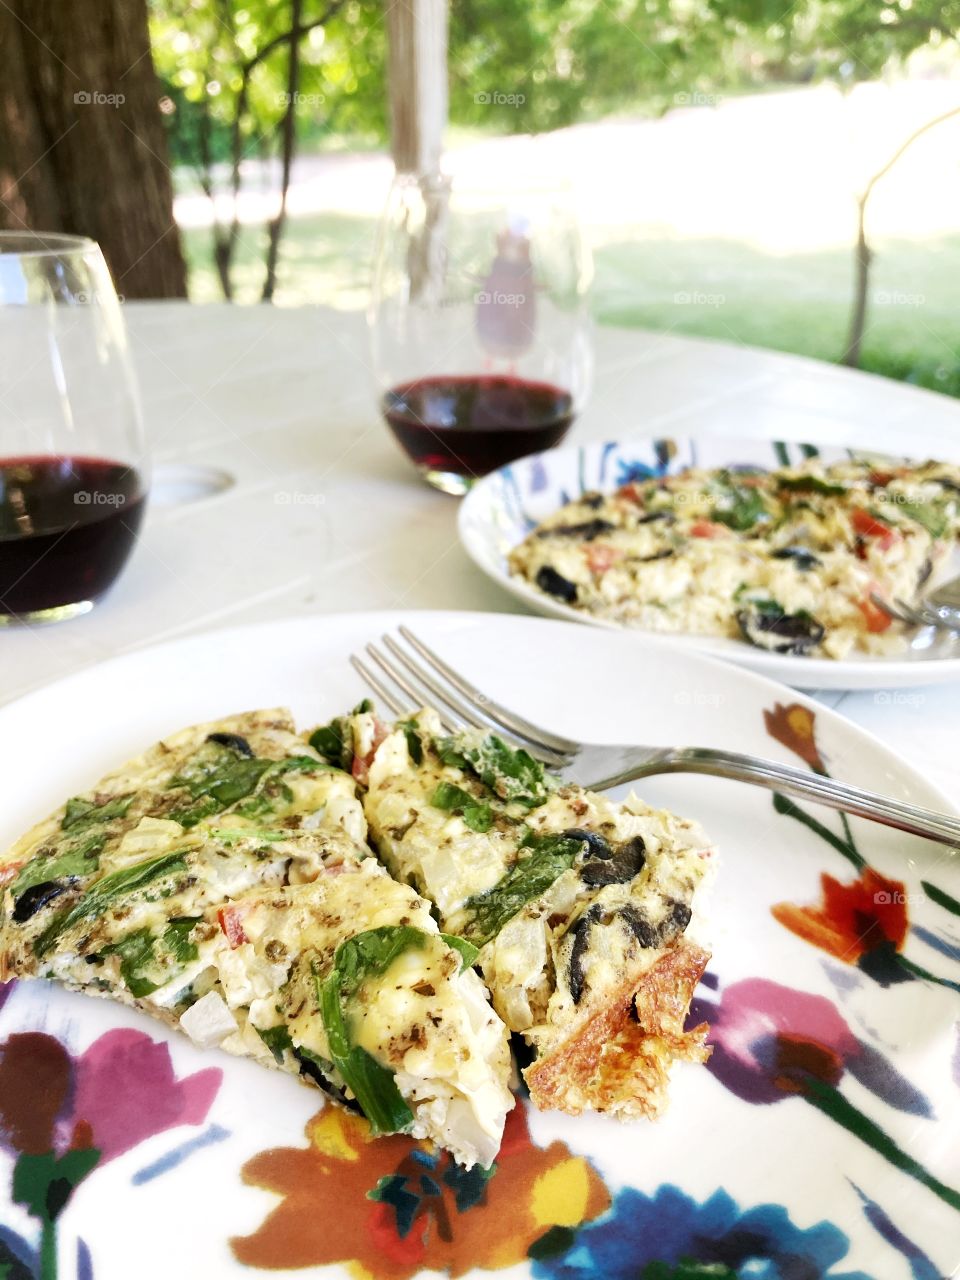 Breakfast frittata with veggies, and a glass of red wine